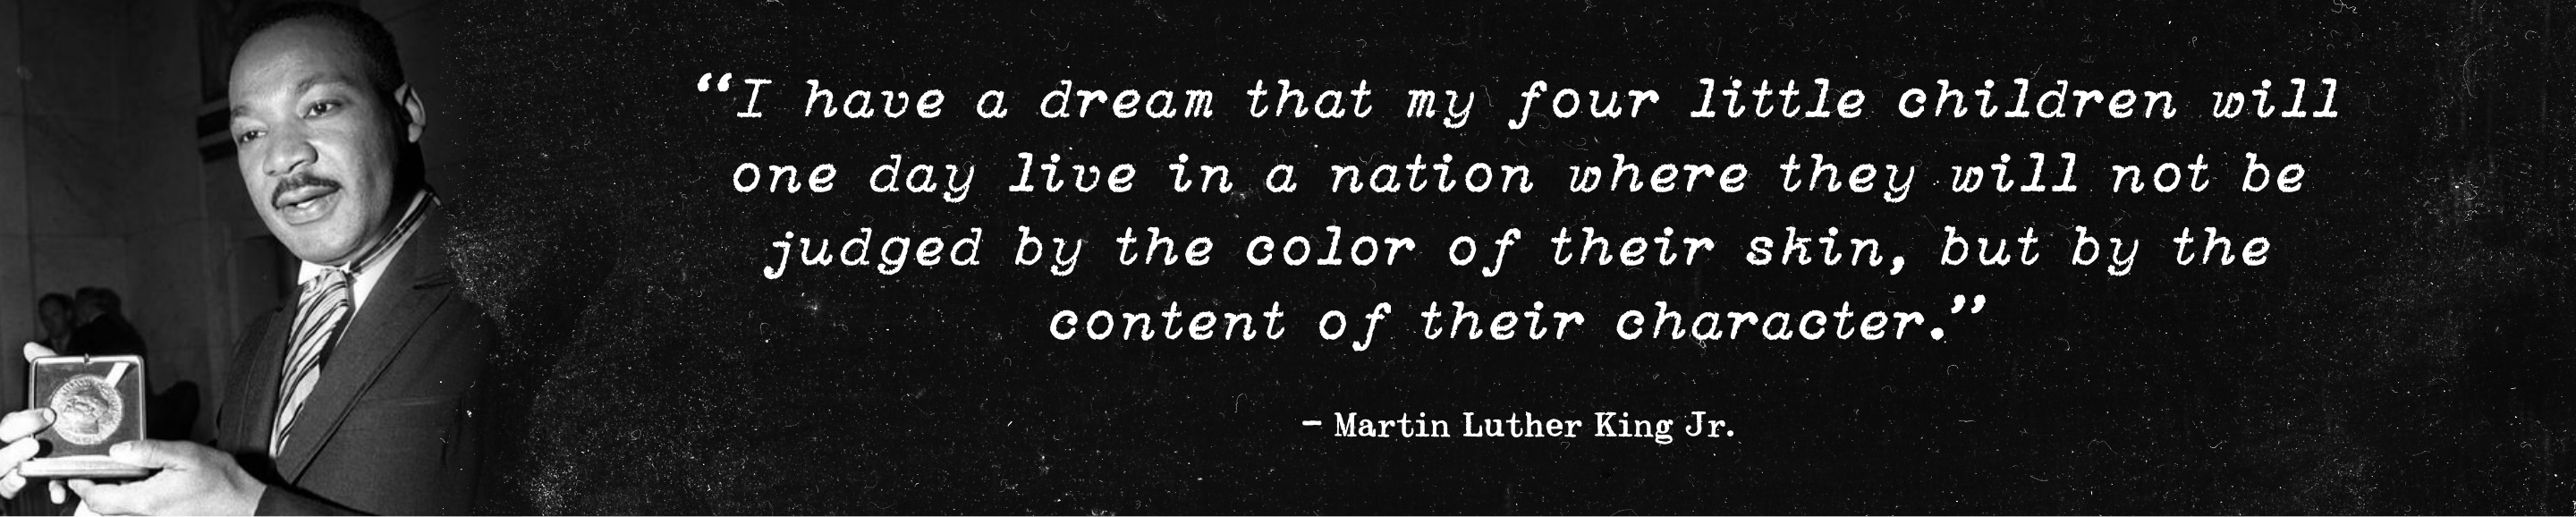 I have a dream quote